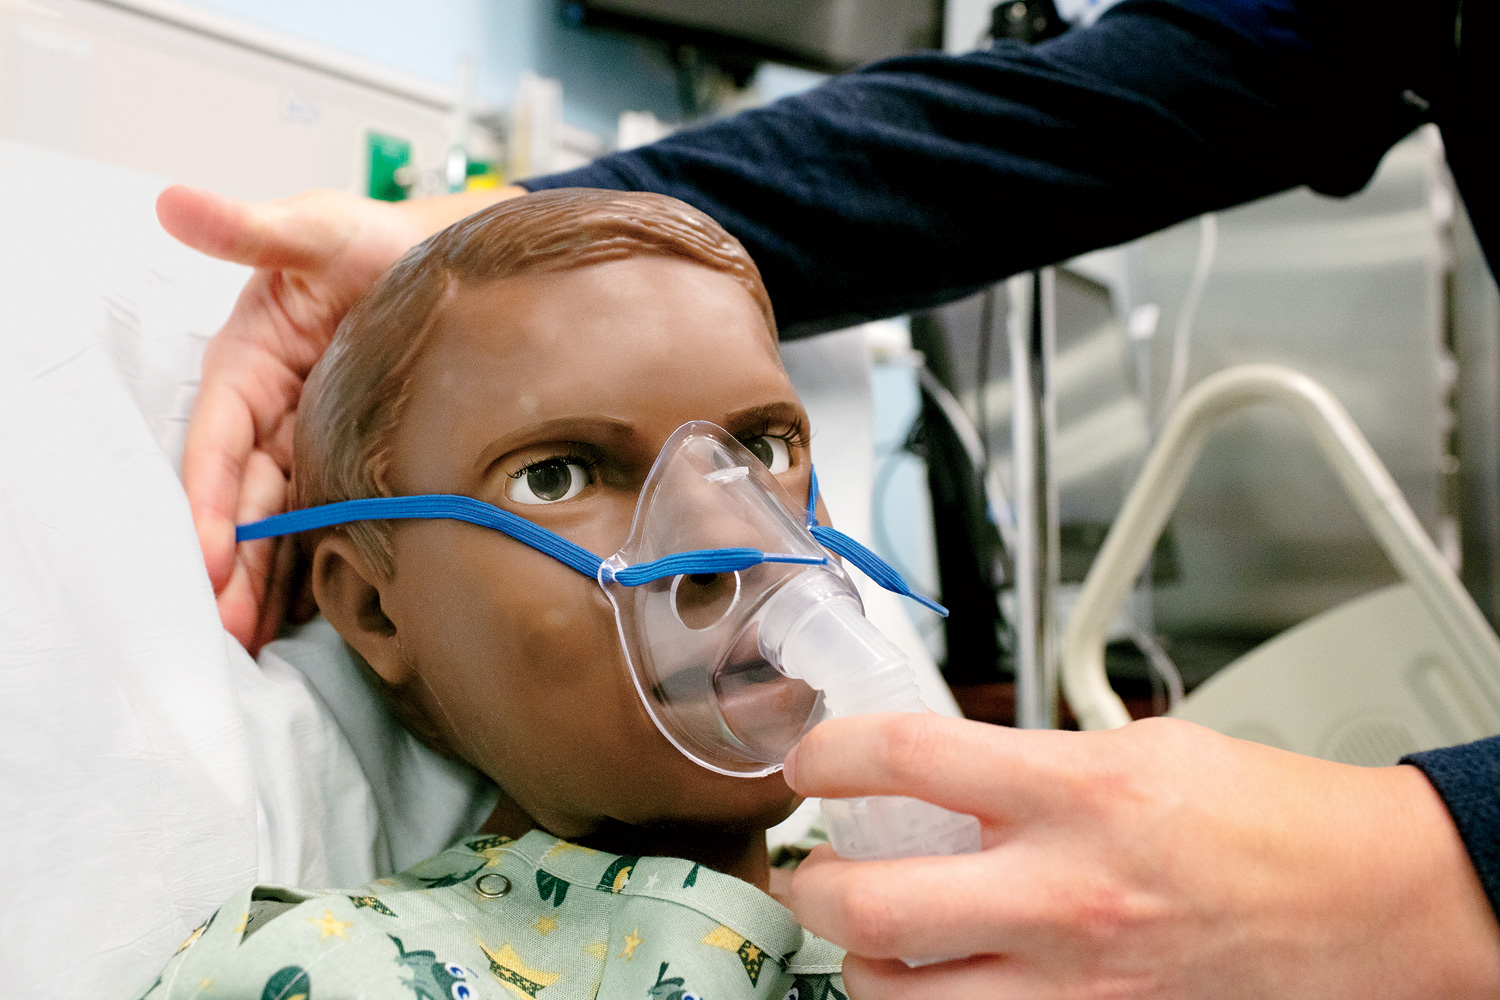 A patient simulation robot with a breathing mask at the Columbia University School of Nursing